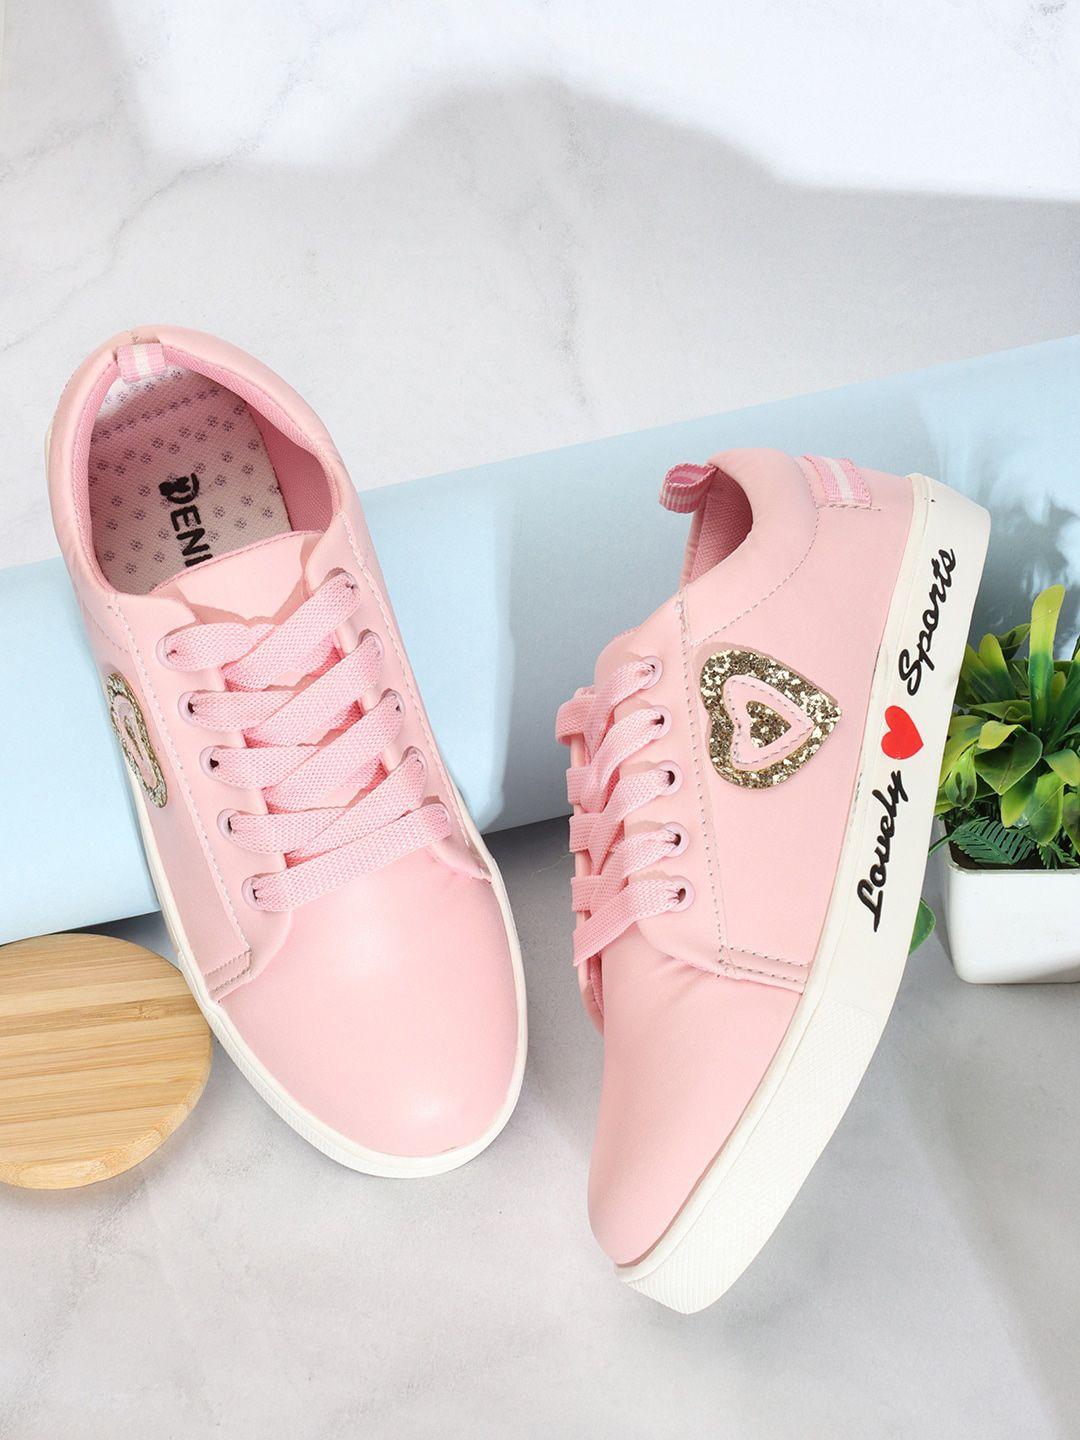 denill women embellished lace-up sneakers